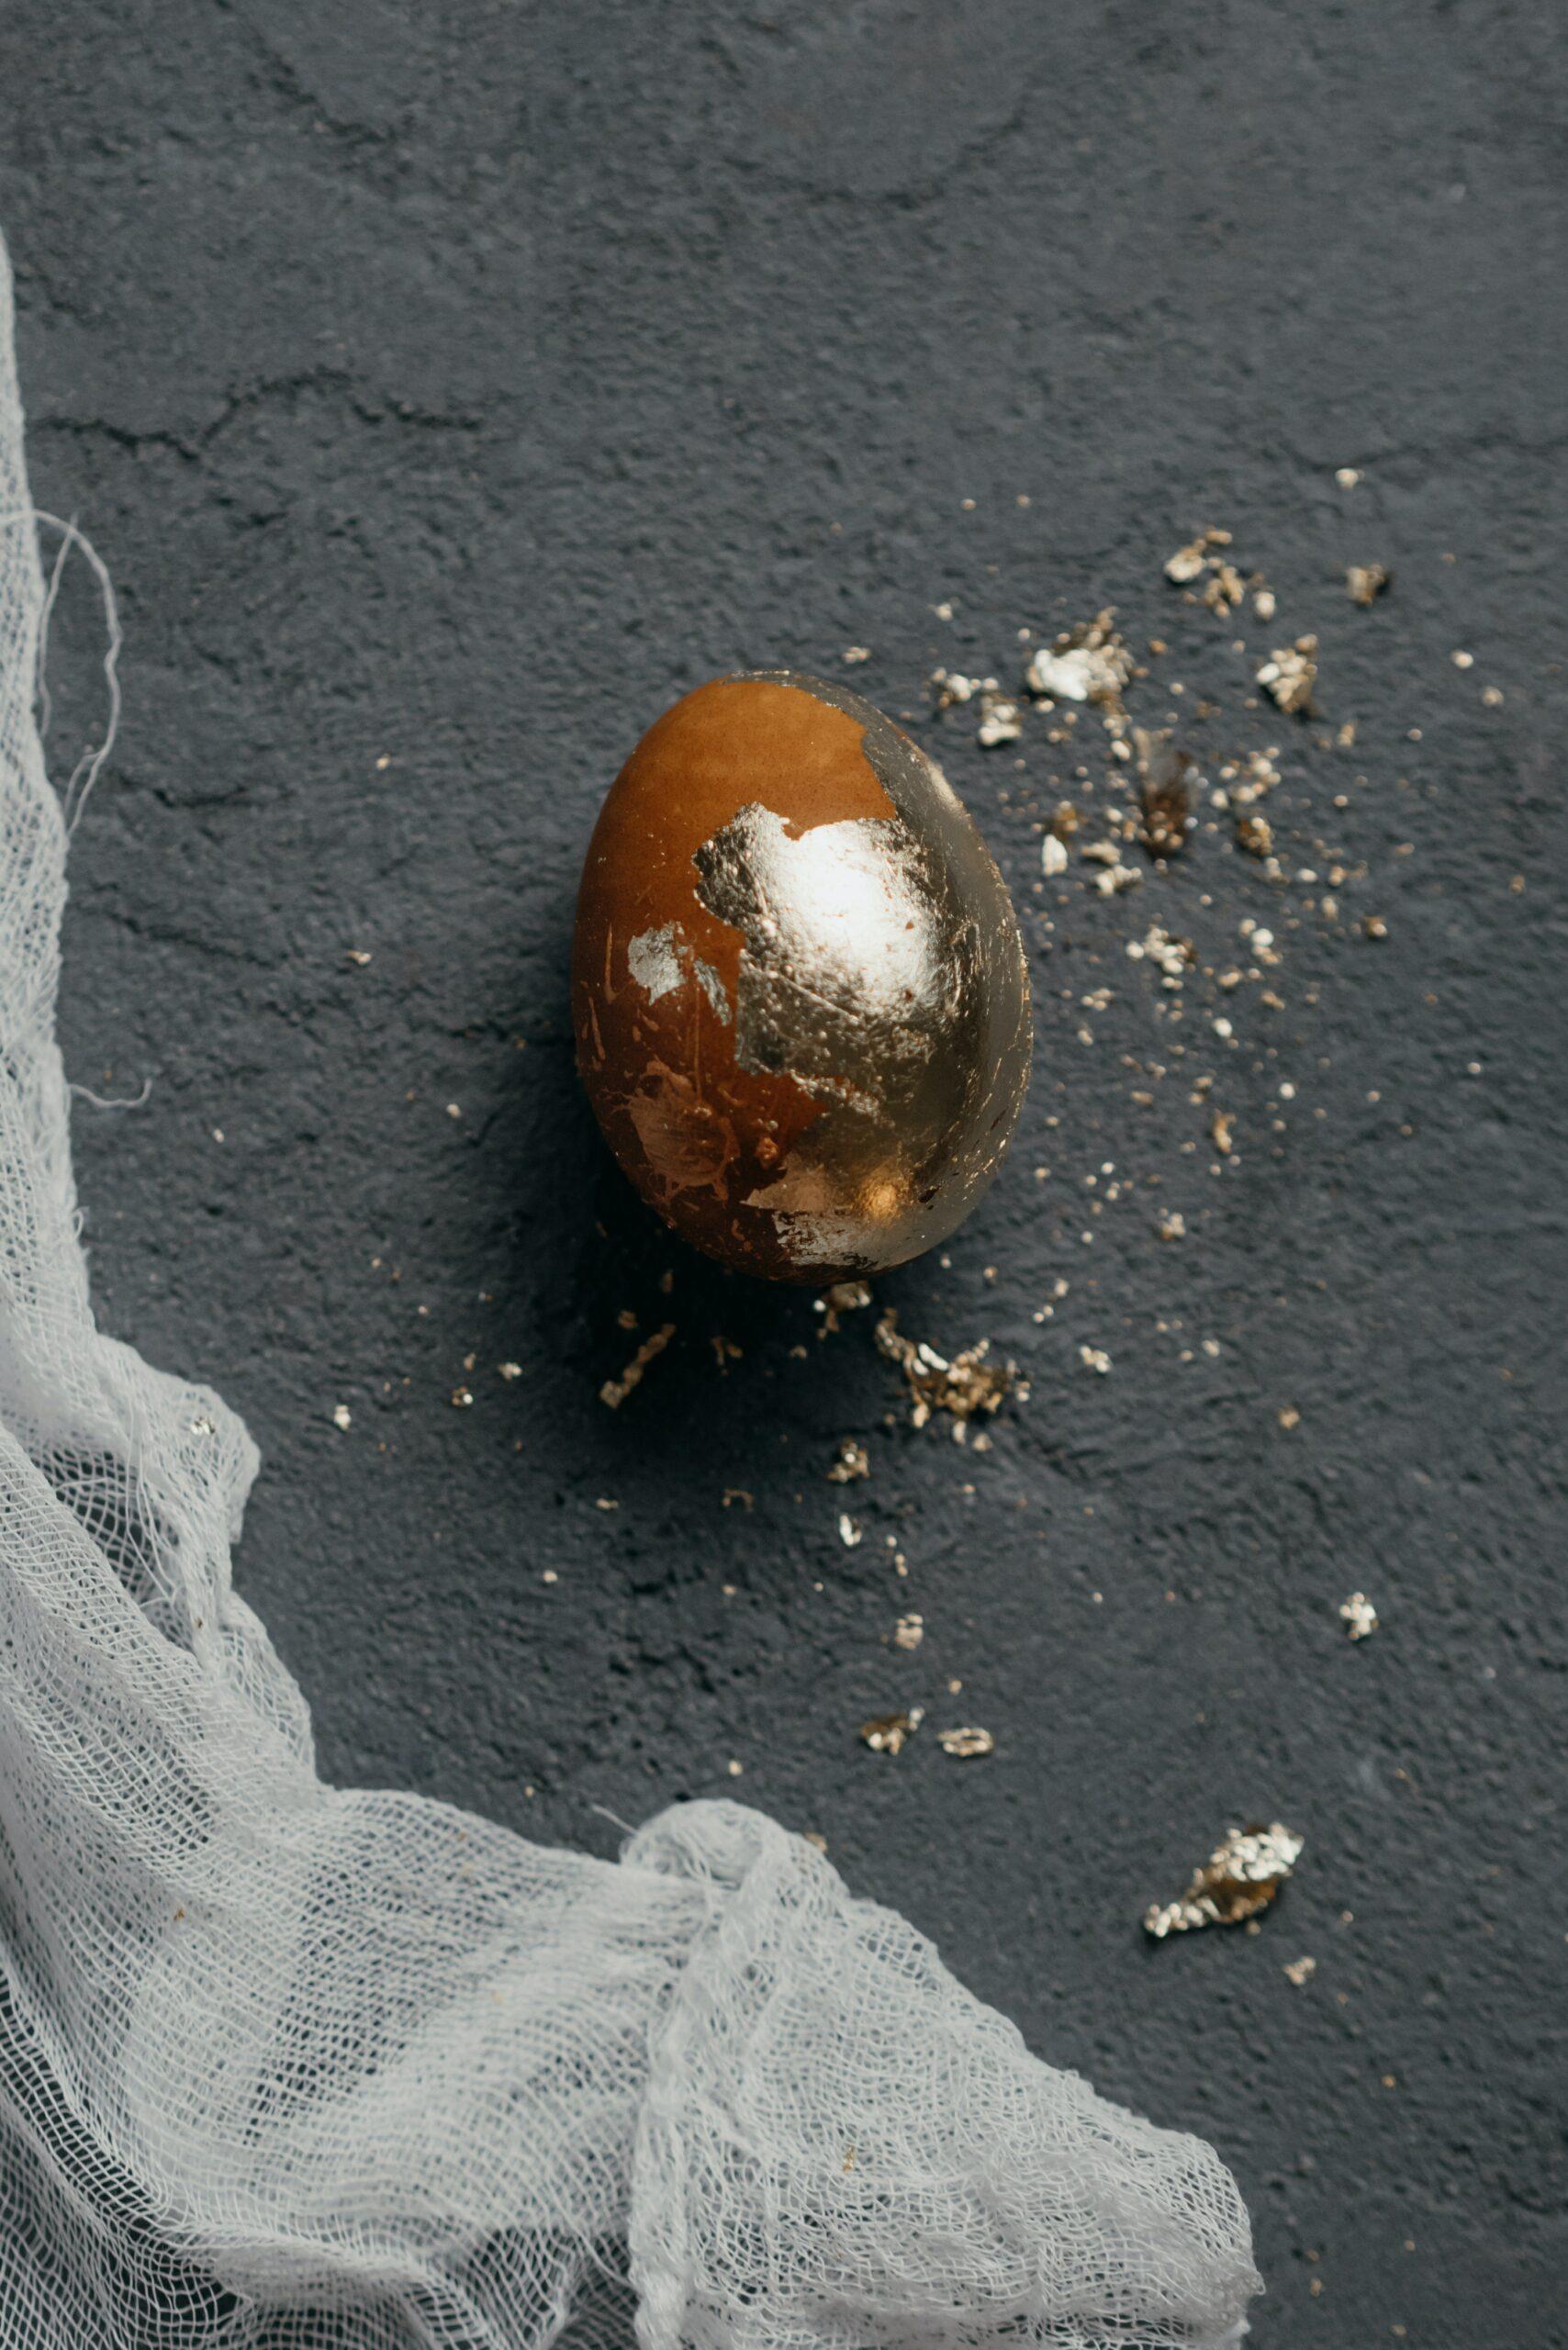 An egg that is painted brown and has gold flecks on it